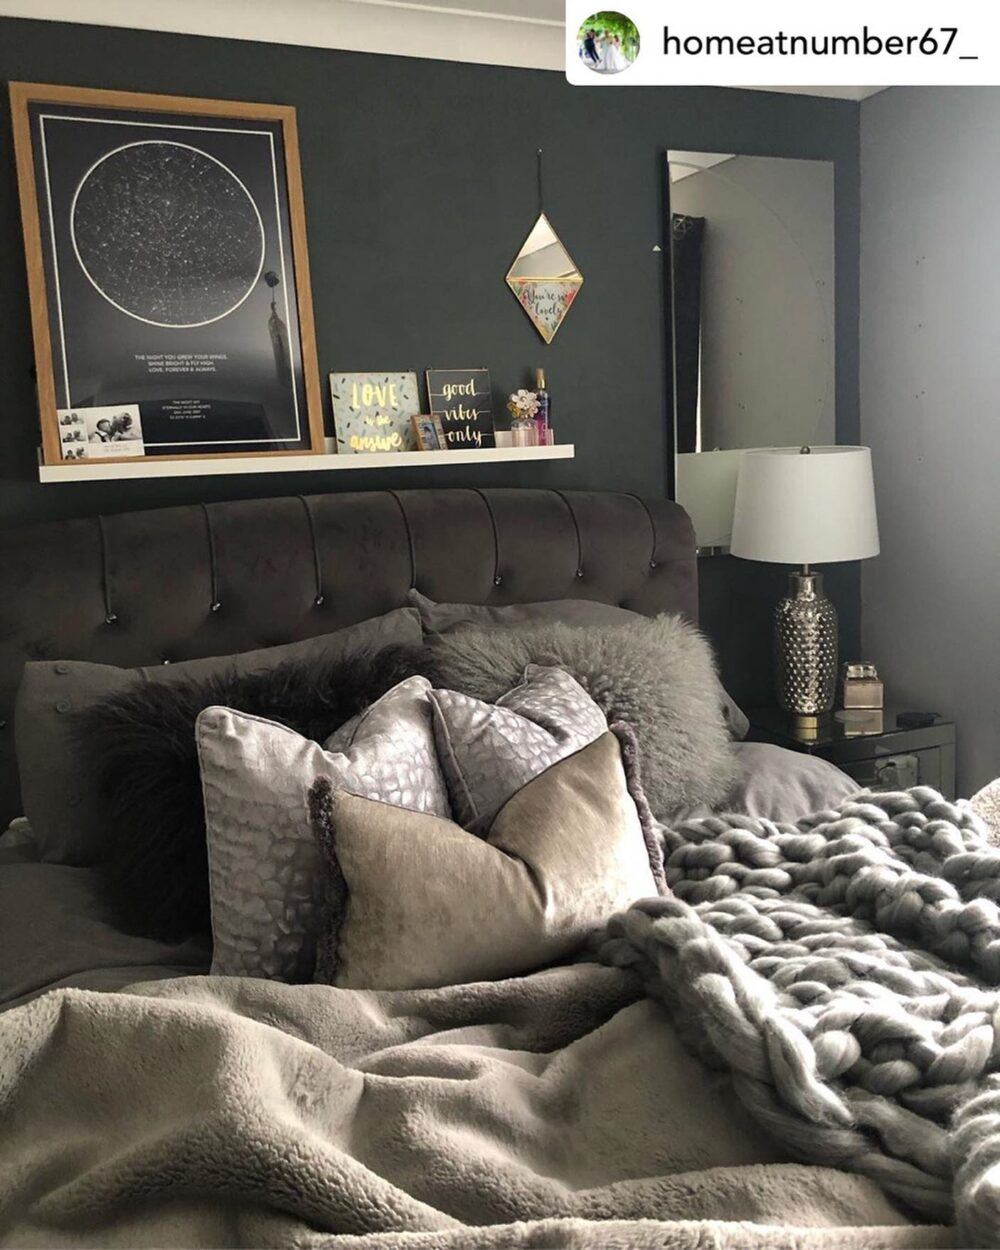 A dark and moody bedroom, using greys, greens and silver and gold touches to balance it out. A black headboard pairs with varying tones and textures of pillows, from fluffy to velvet, and a chunky knit throw matches a fleece one atop the bedsheets. Above it all, a floating shelf holds various cards and knickknacks.